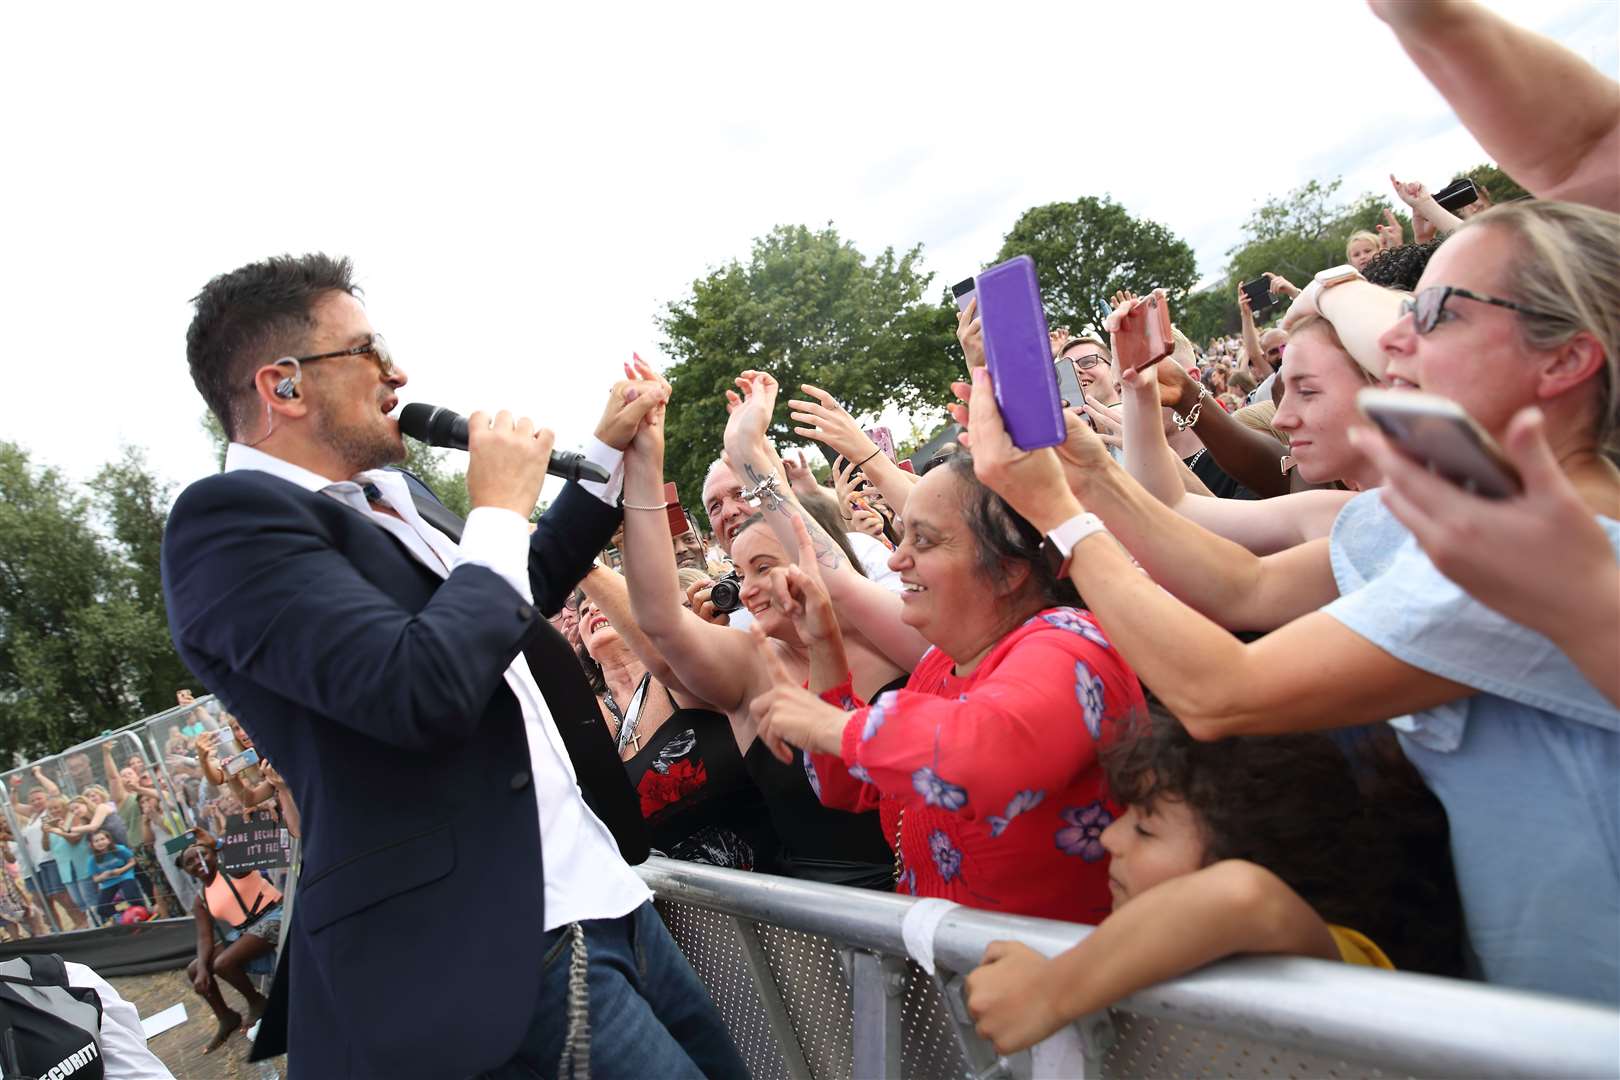 The role involves overseeing festivals, such as last month's Gravesham Riverside Festival headlined by Peter Andre. Picture: Gravesham Borough Council